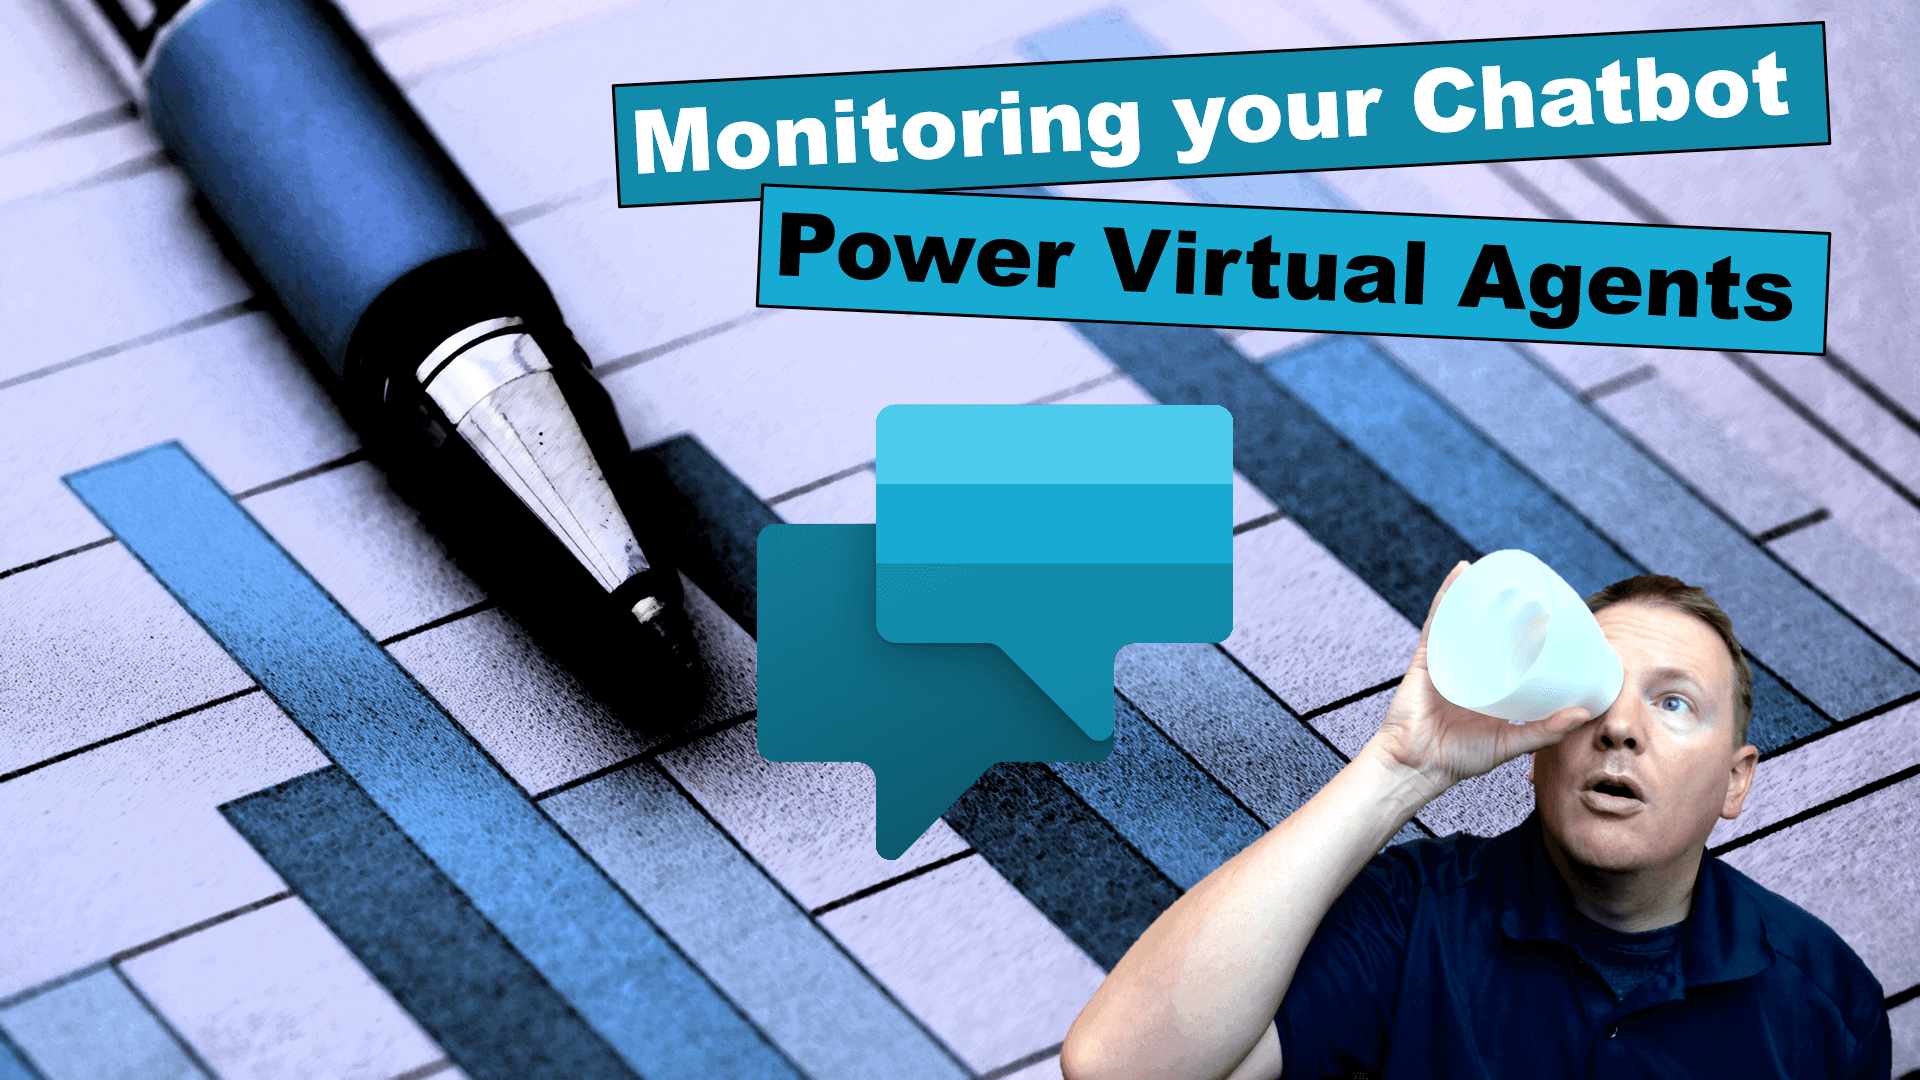 Monitoring your Chatbot Power Virtual Agents cover photo